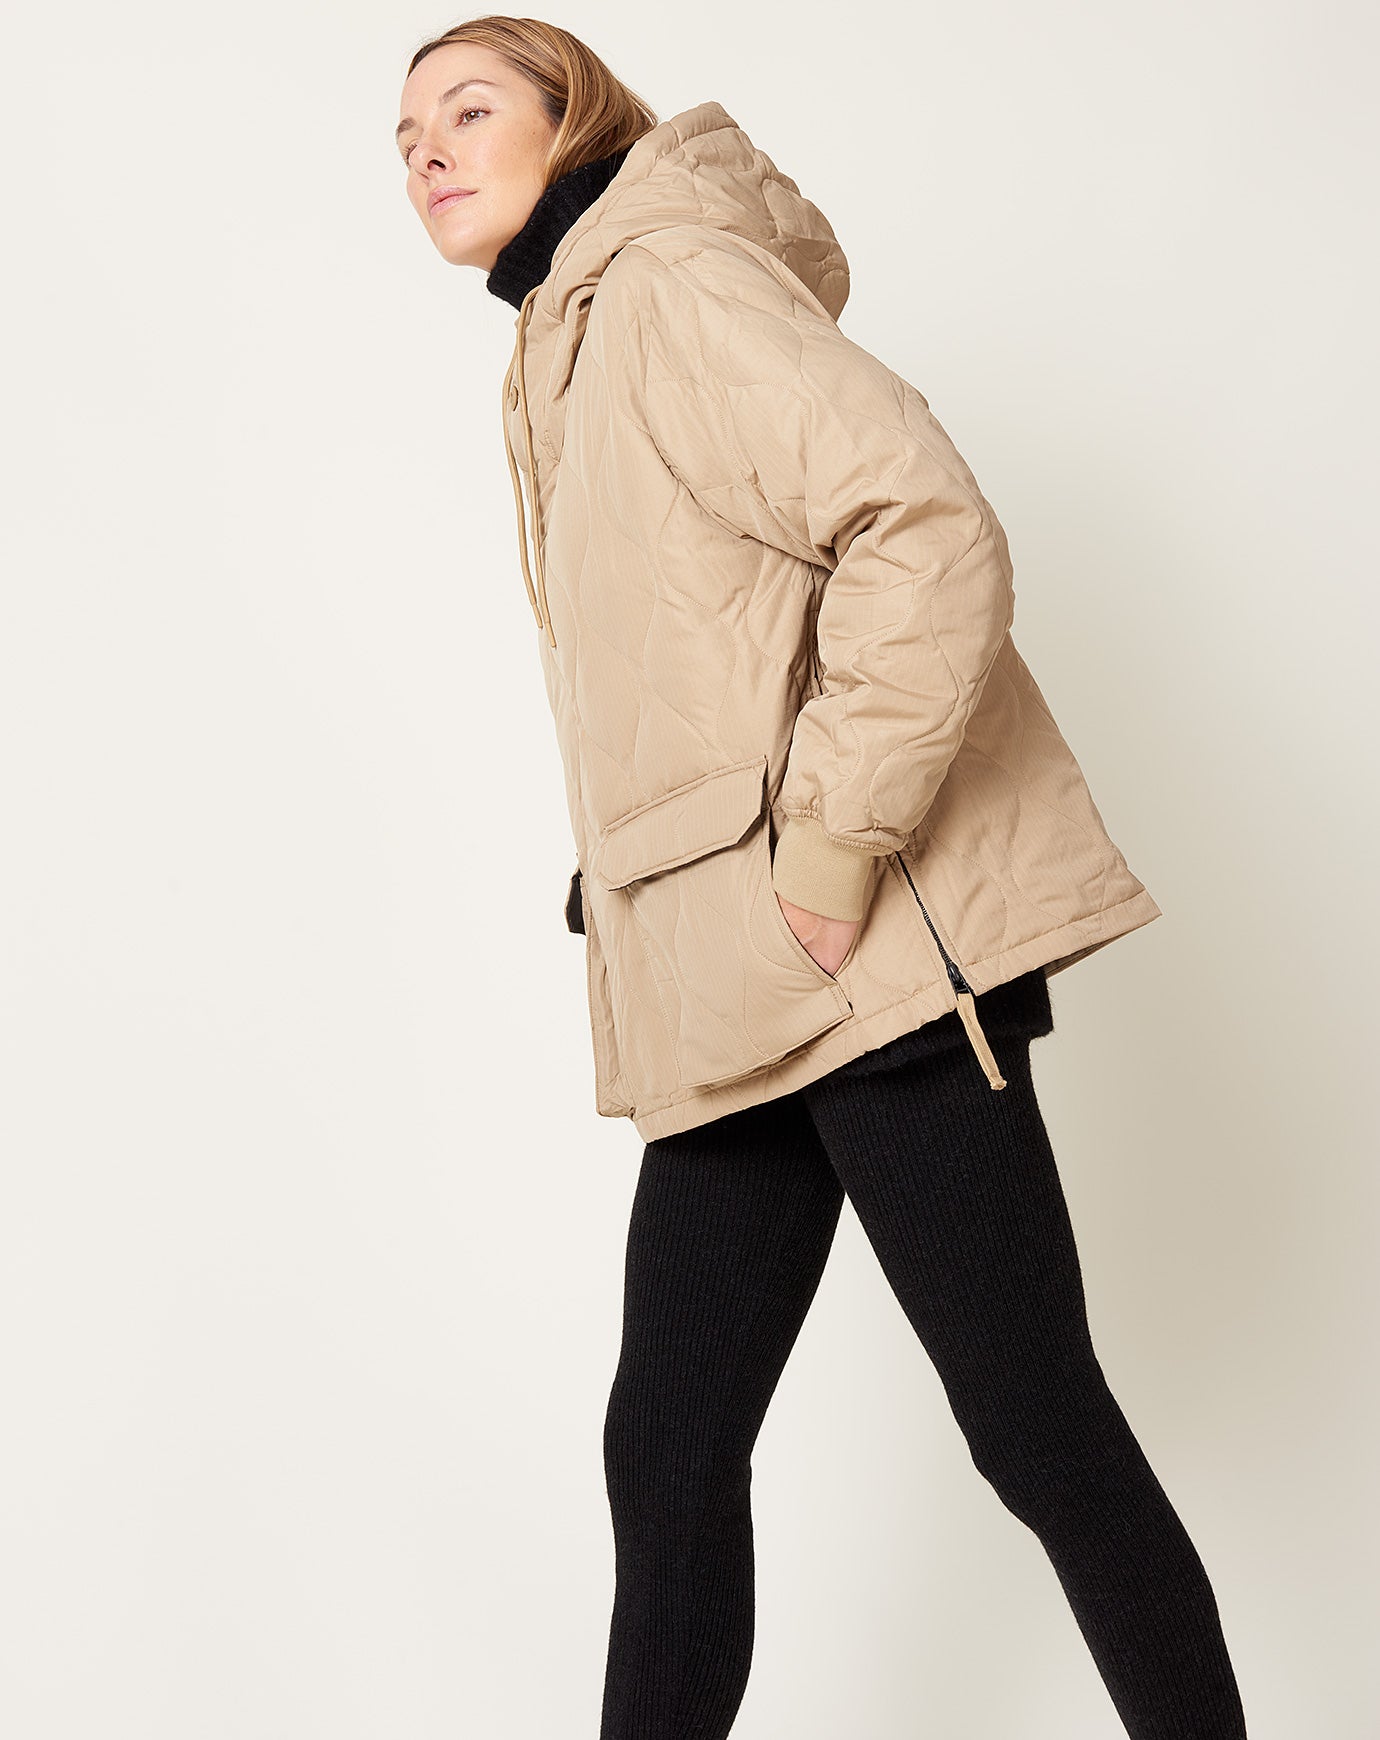 Taion Military Pull Over Hoodie in Coyote